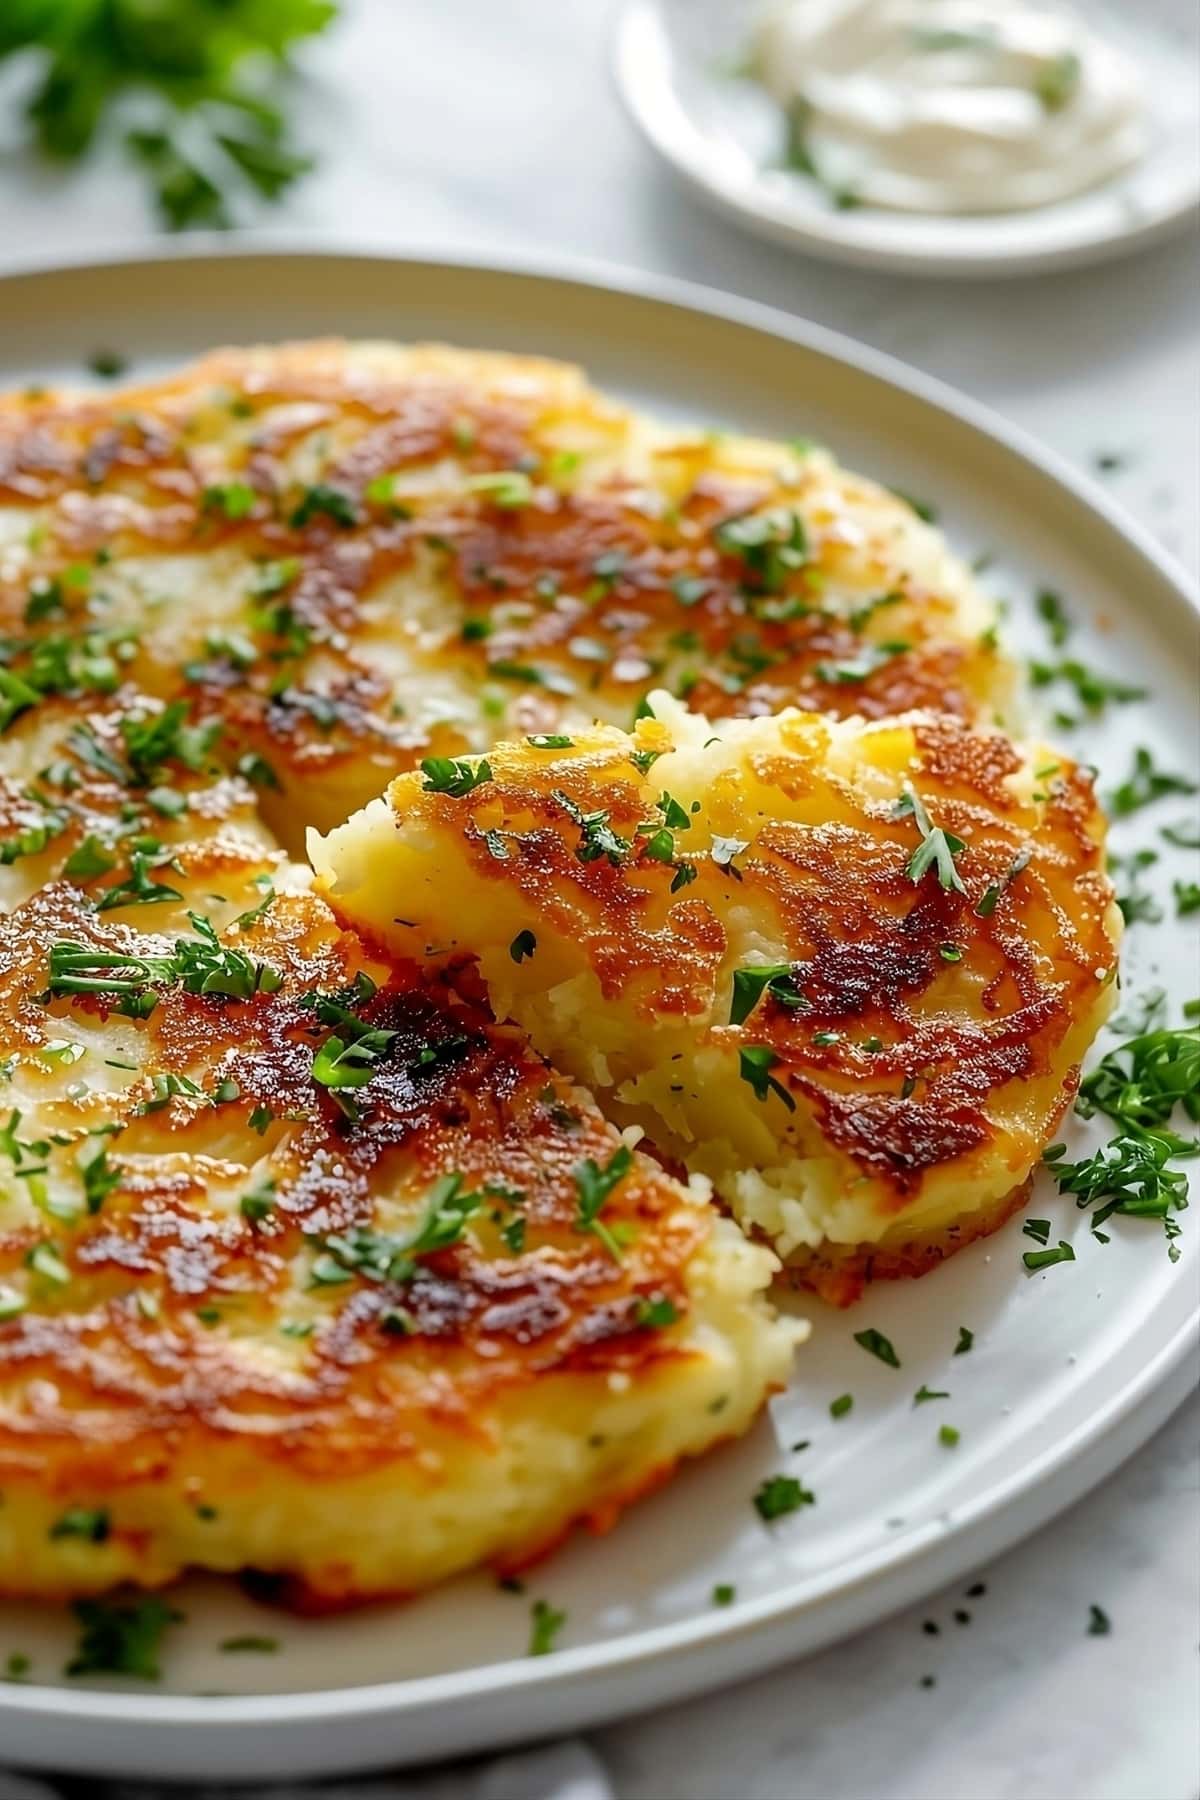 Sliced bubble and squeak made with mashed potato and cabbage served on a plate.